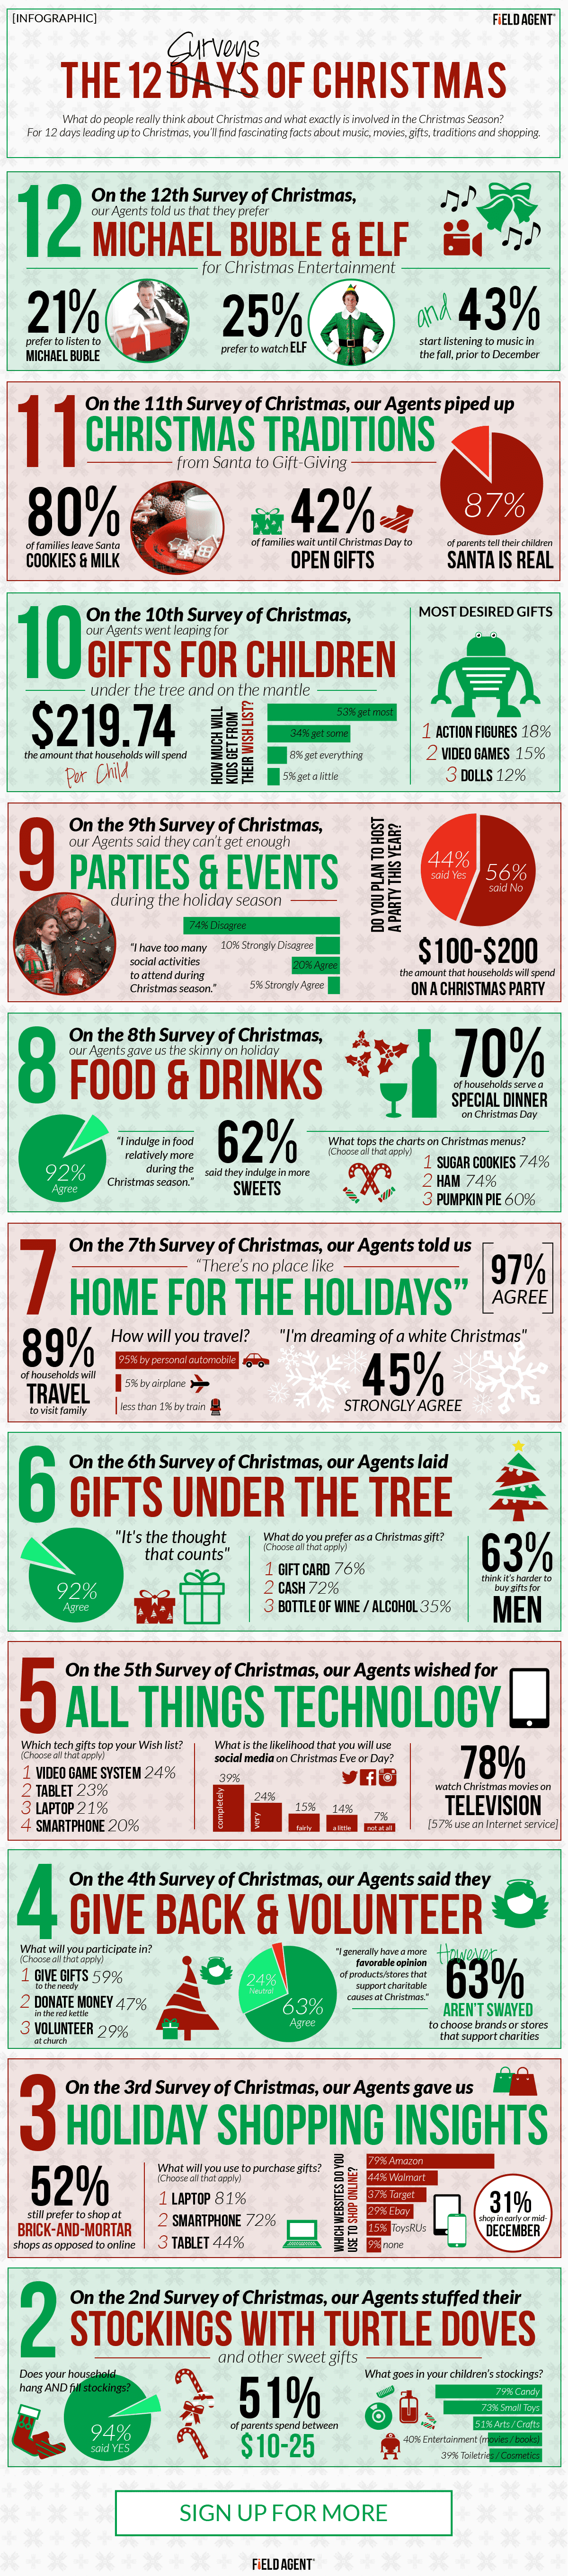 12 Surveys of Christmas Day 2 Infographic 